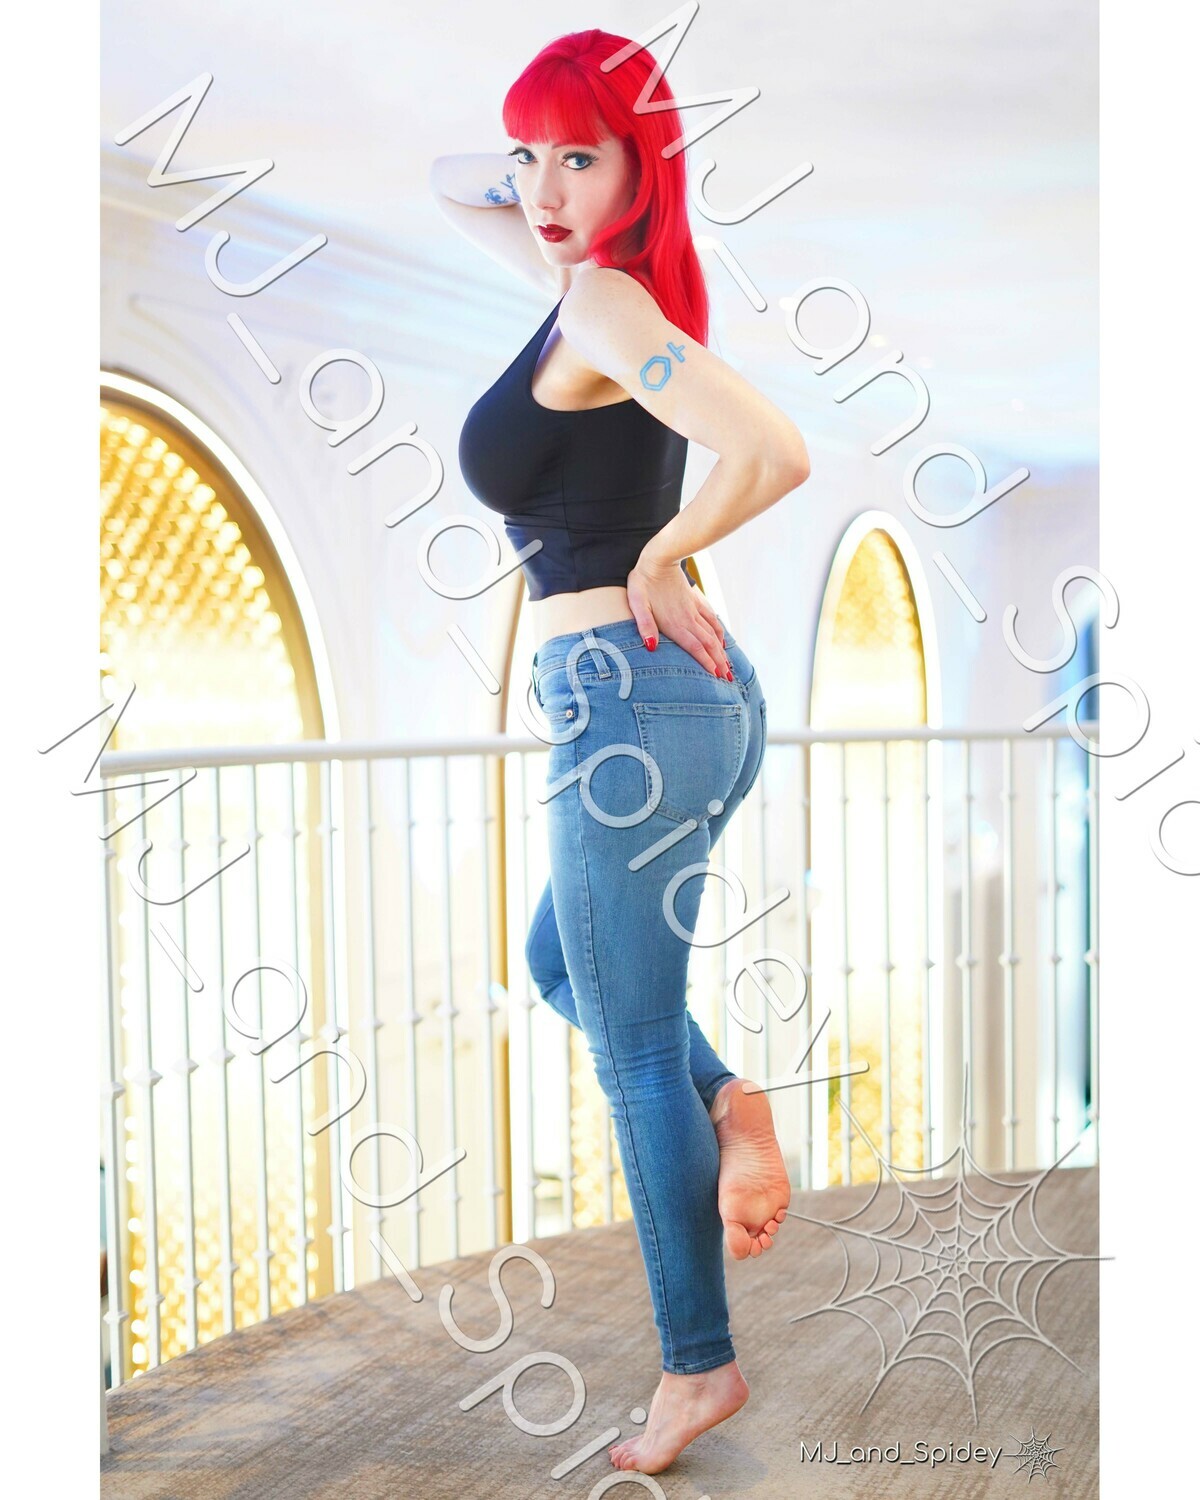 Marvel - Spider-Man - Mary Jane Watson - Campbell 8 - Digital Cosplay Image (@MJ_and_Spidey, MJ and Spidey, Comics)